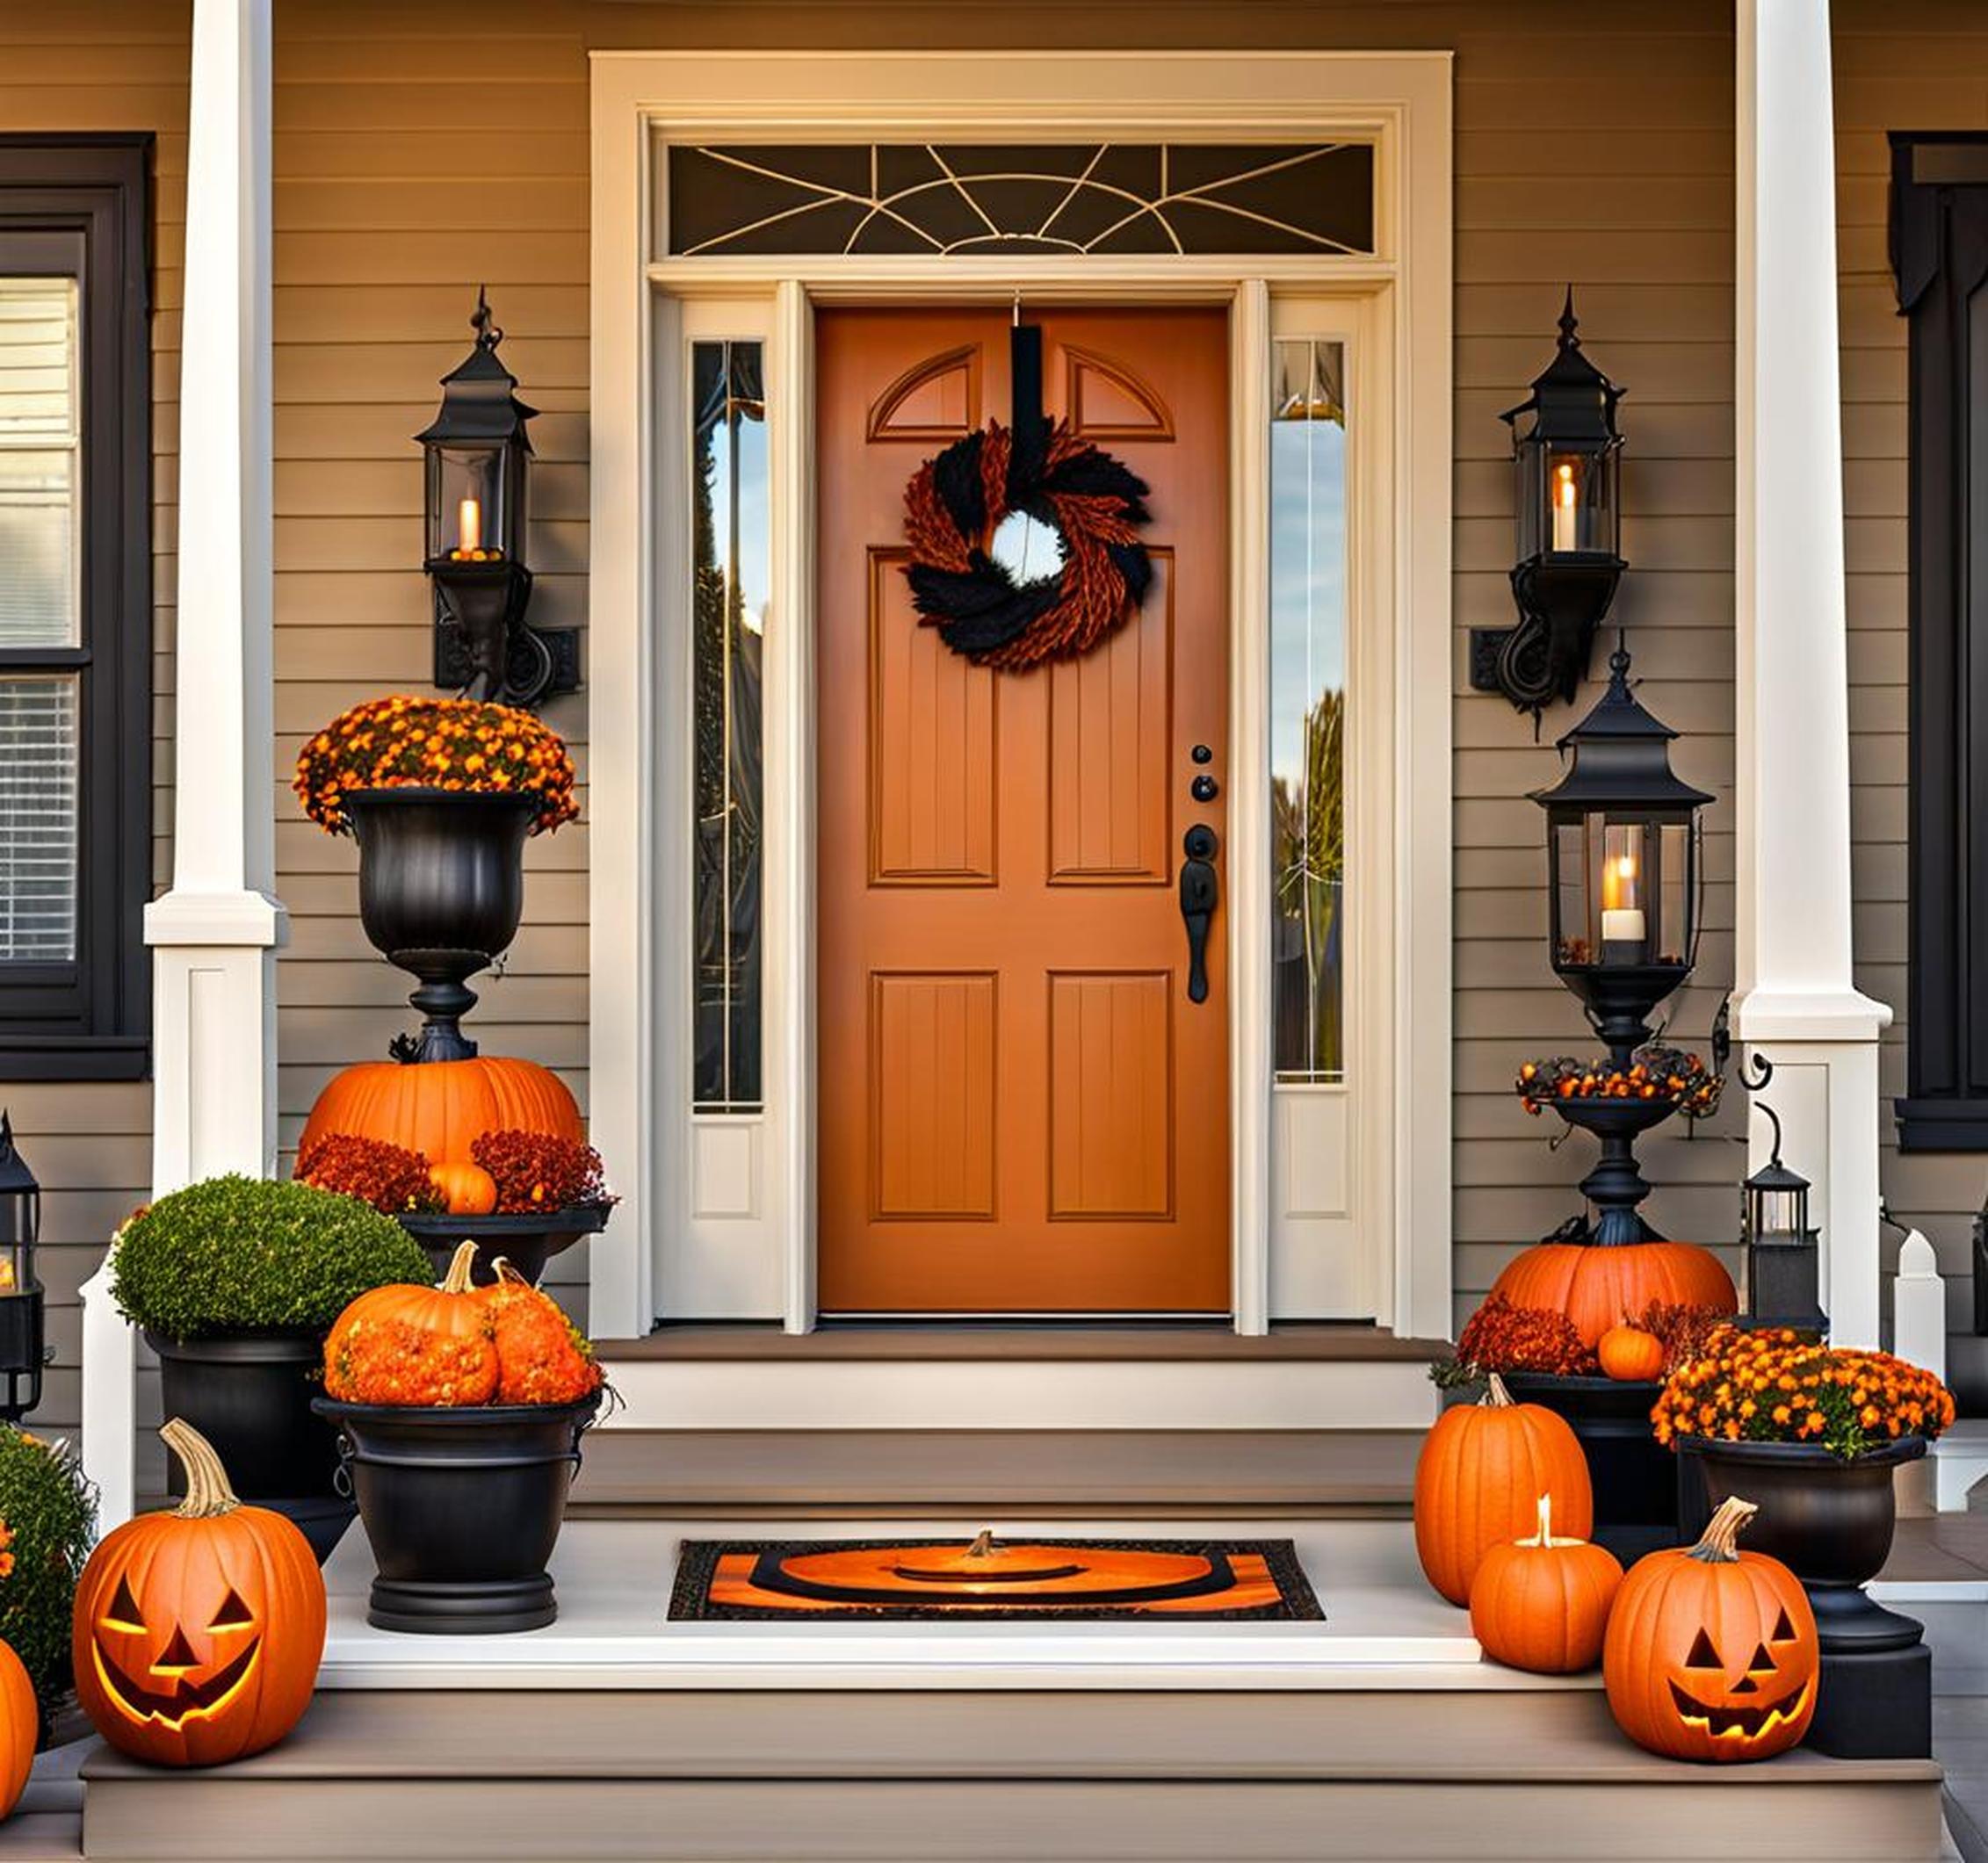 decorated homes for halloween